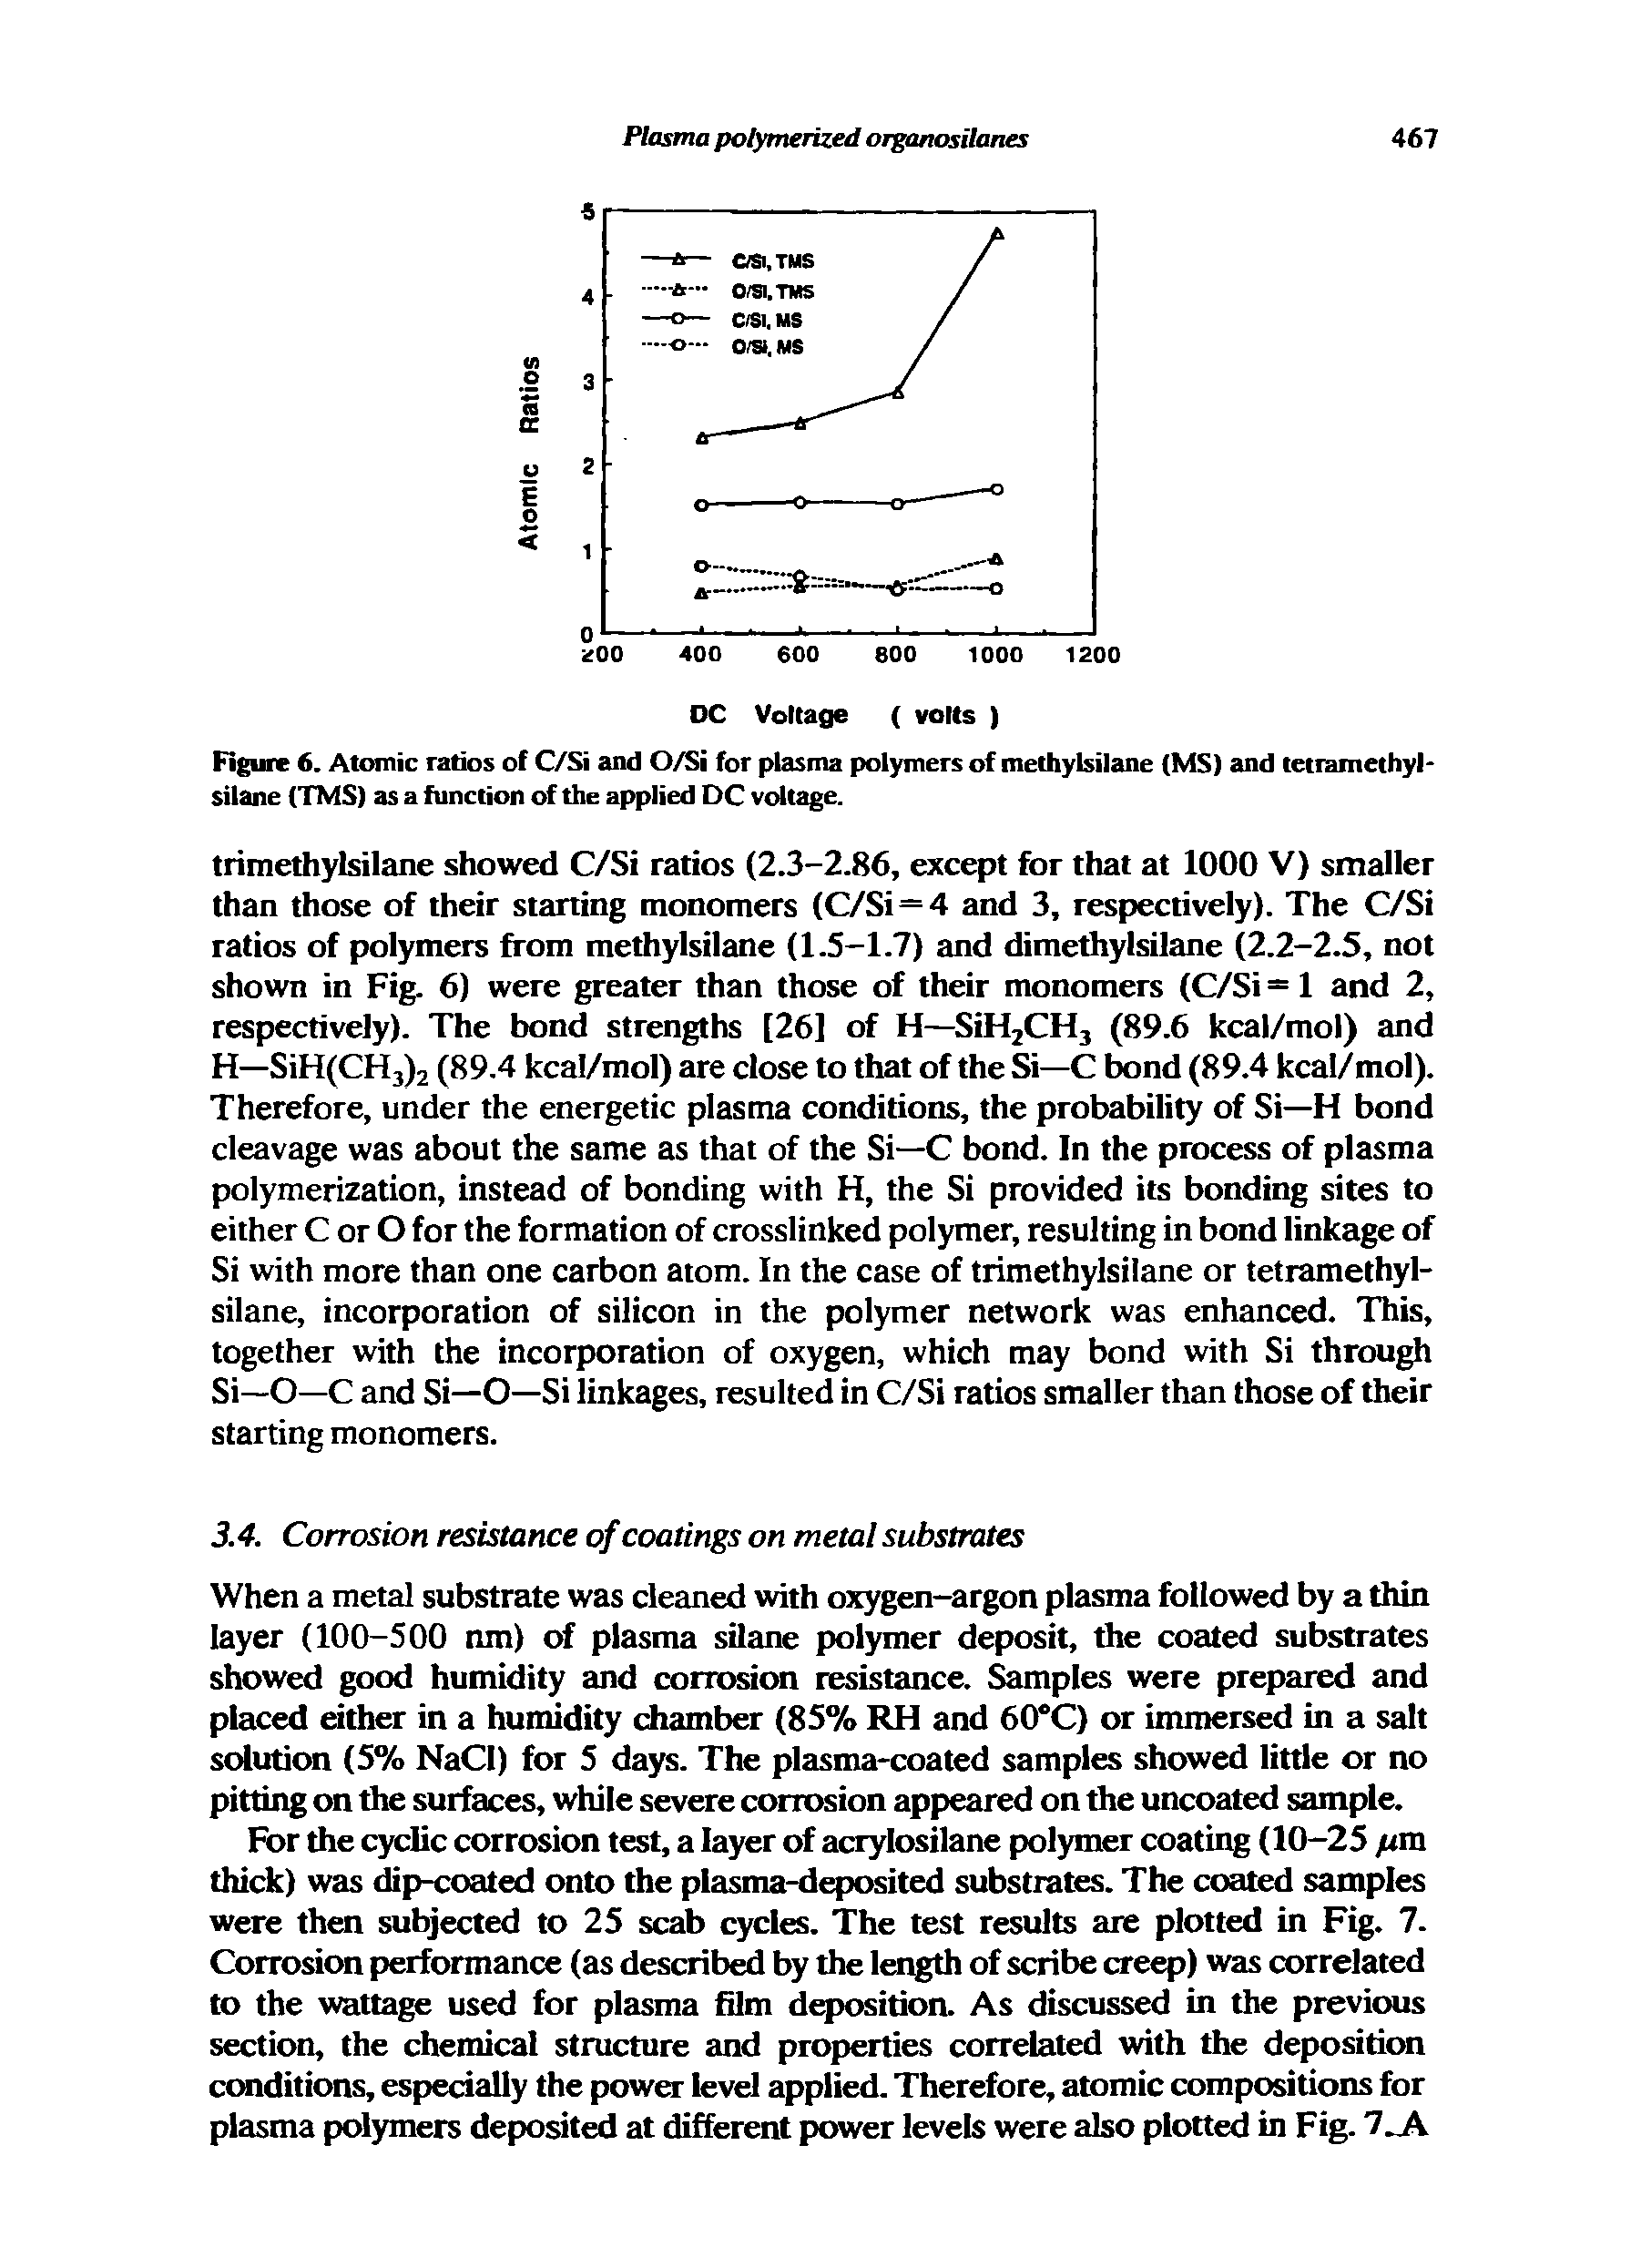 Figure 6. Atomic ratios of C/Si and O/Si for plasma polymers of methylsilane (MS) and tetramethyl-silane (TMS) as a function of the applied DC voltage.